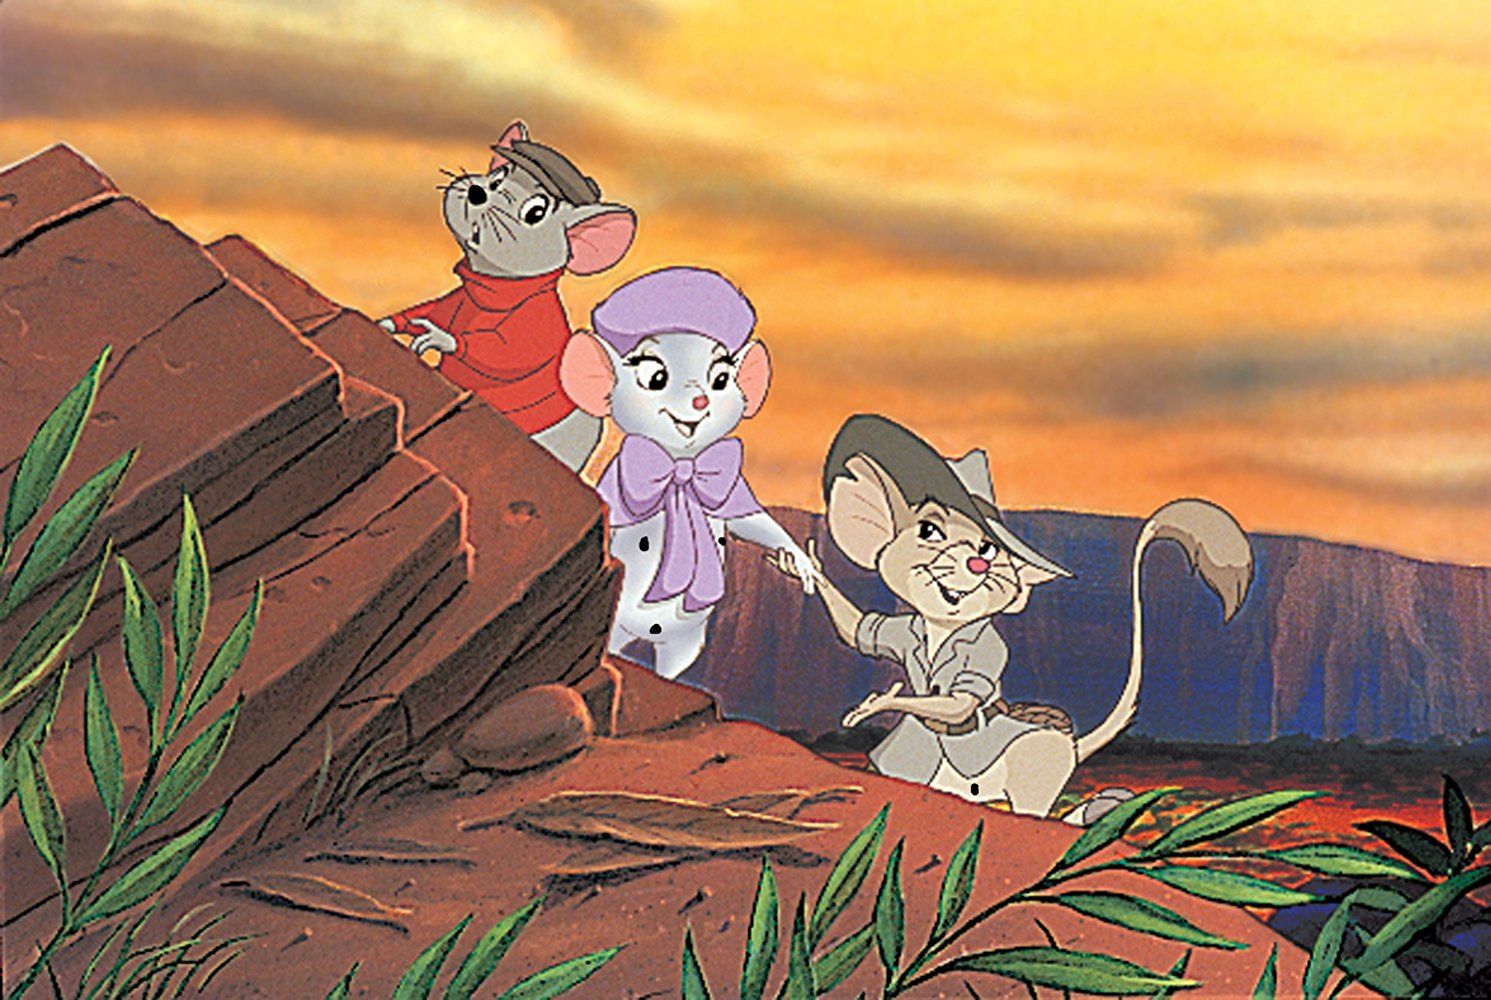 The Rescuers / The Rescuers Down Under (35th Anniversary Edition) (Blu-ray + DVD), Walt Disney Video, Kids & Family - image 2 of 5